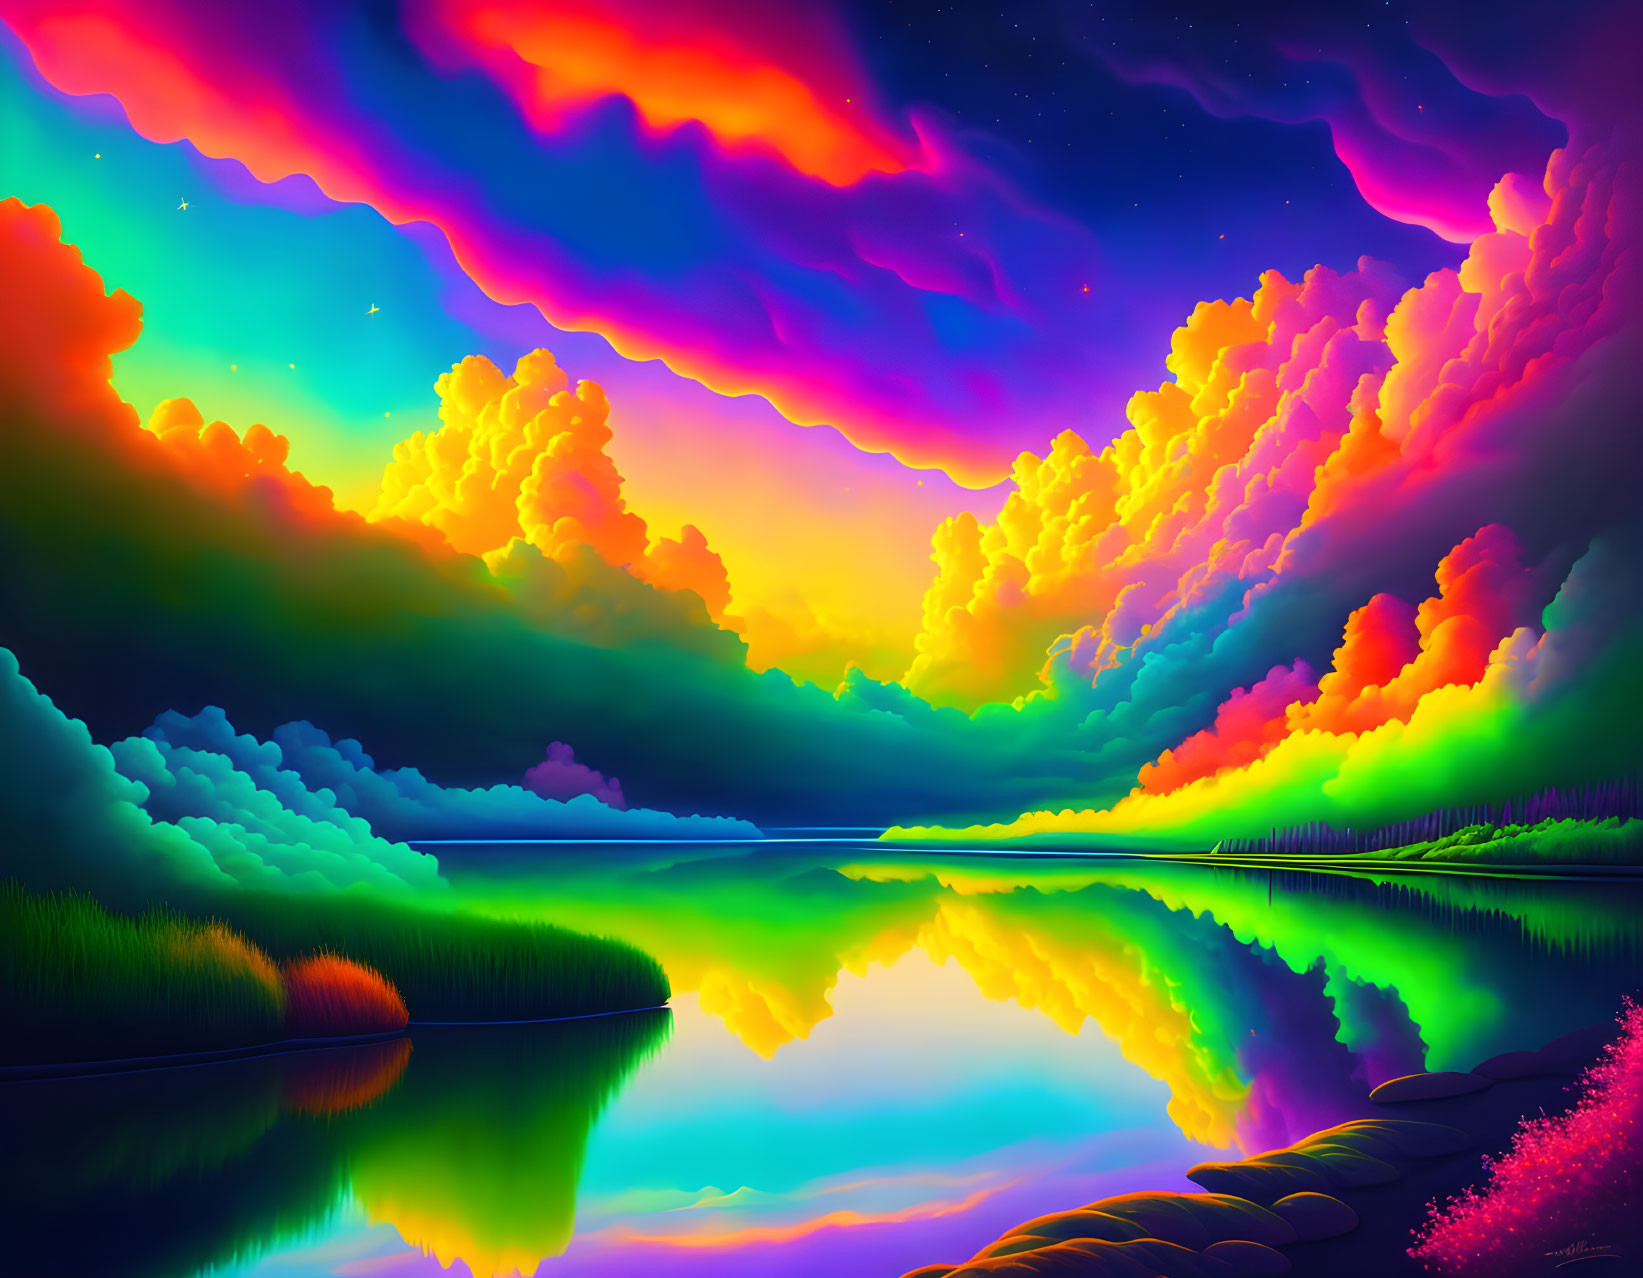 Colorful surreal landscape with vibrant sky reflection in tranquil lake